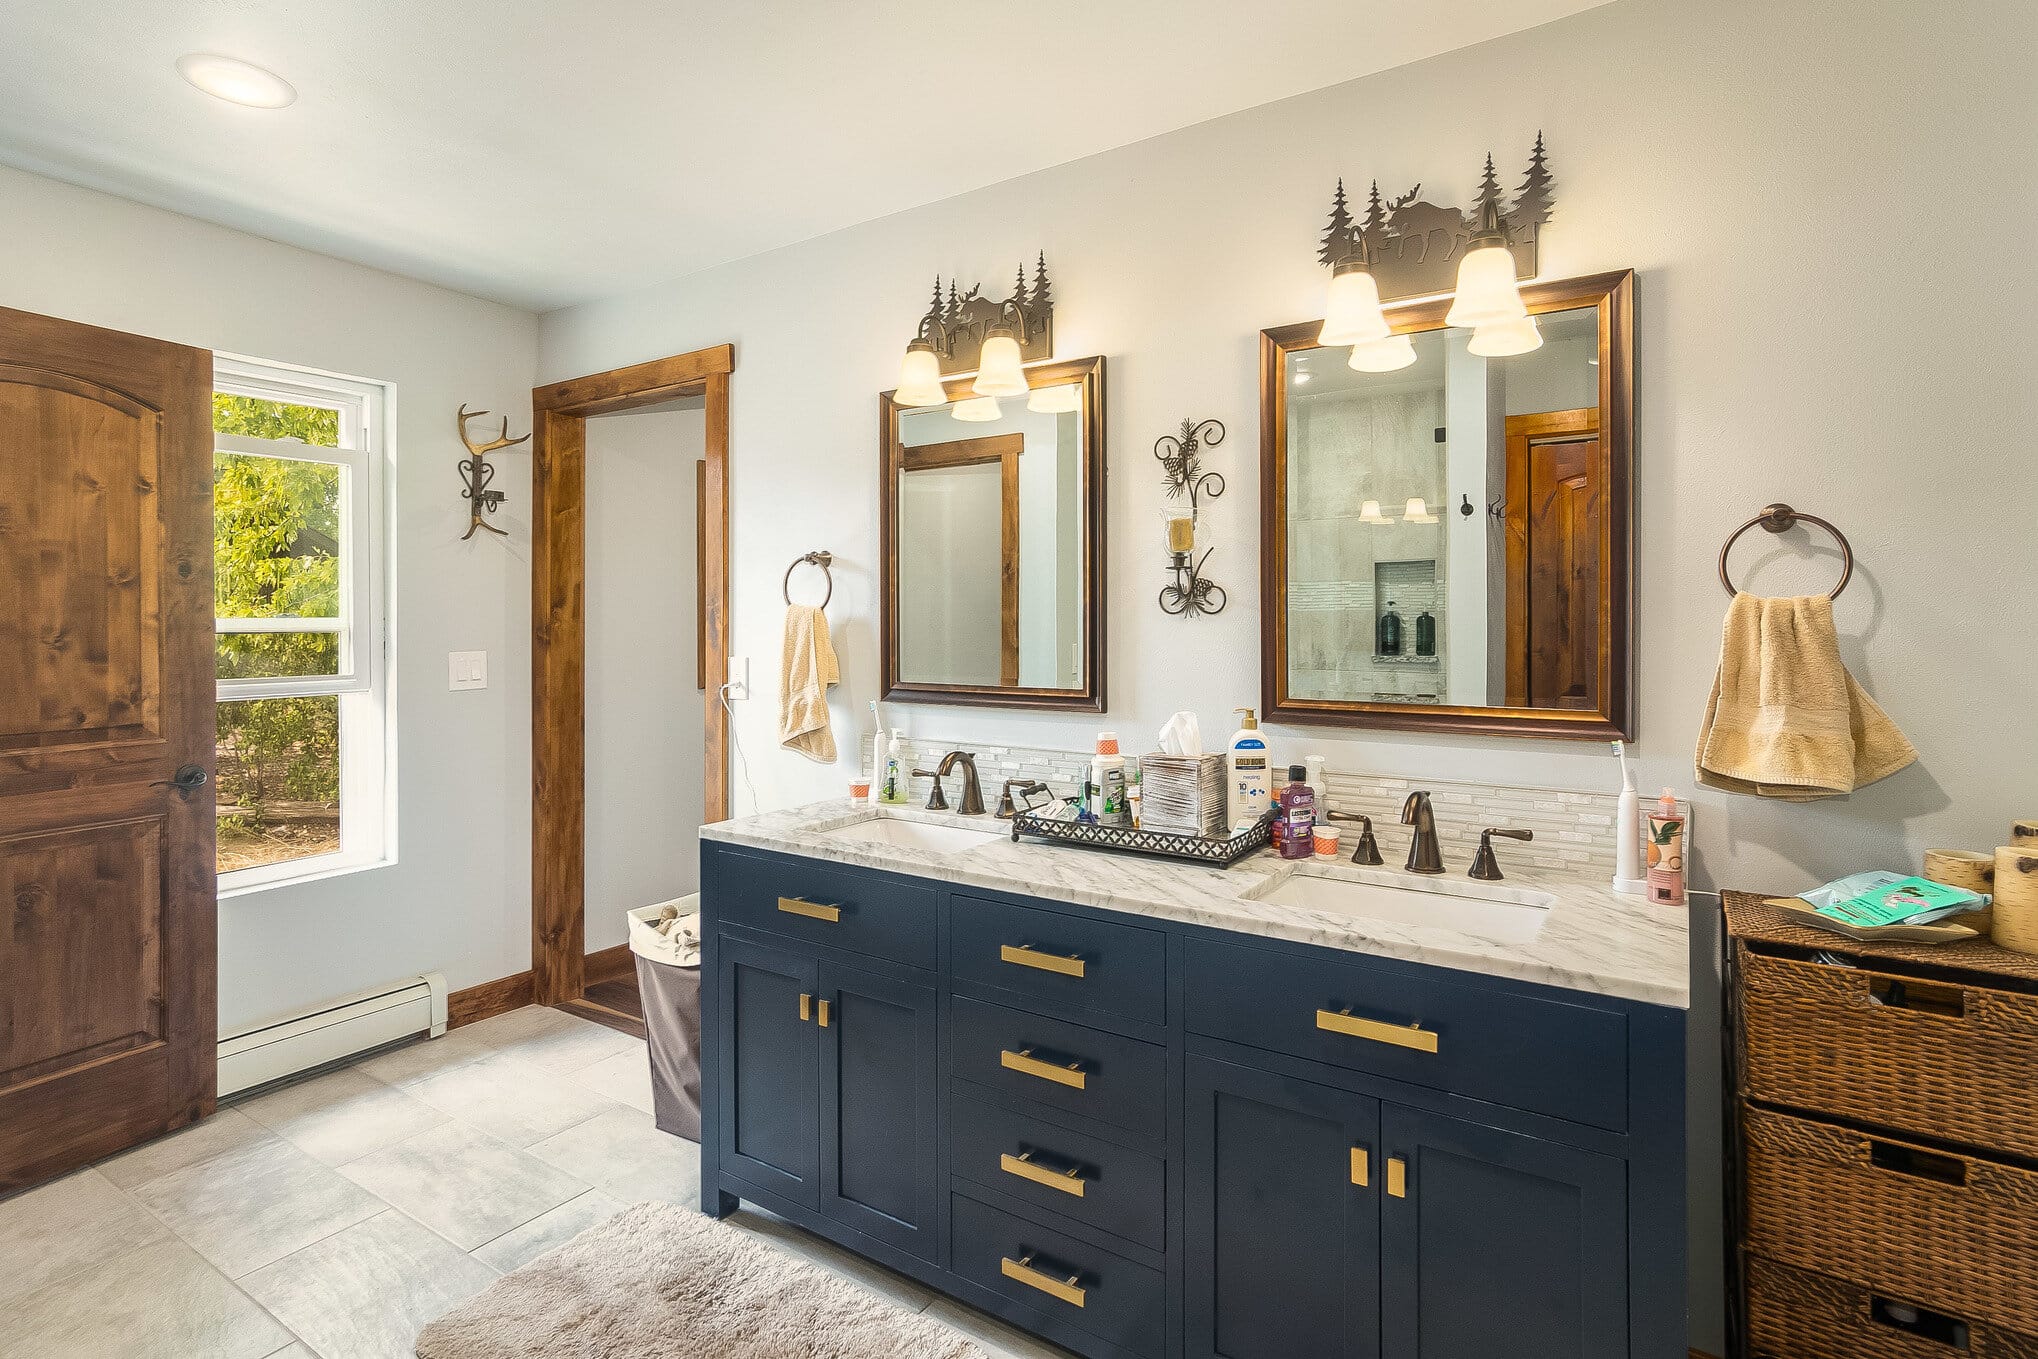 Double bathroom vanity with navy blue cabinets and white marble countertop